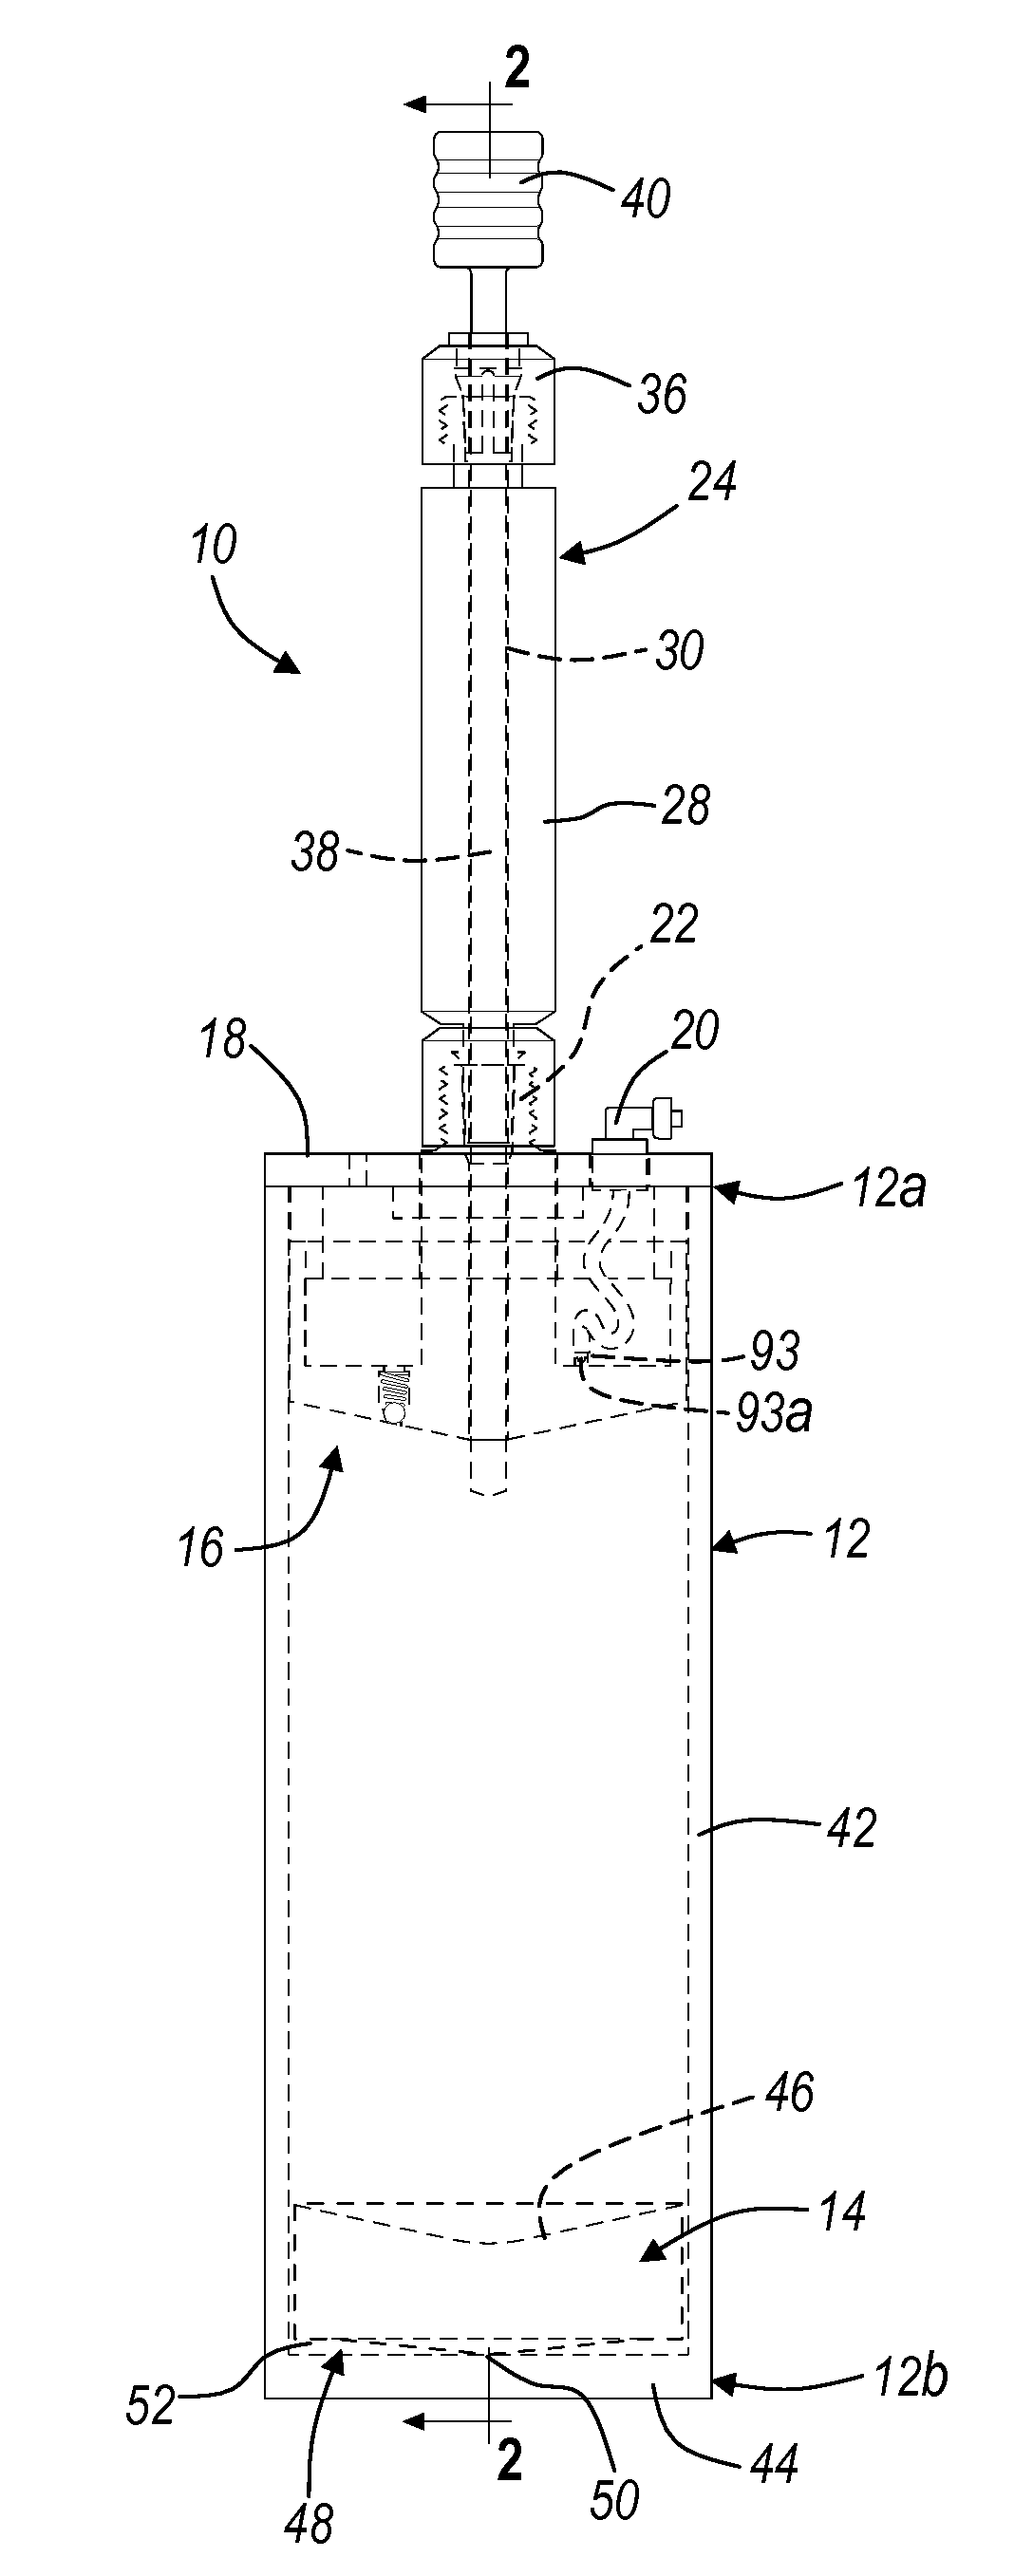 Apparatus And Method For Separating And Concentrating Fluids Containing Multiple Components